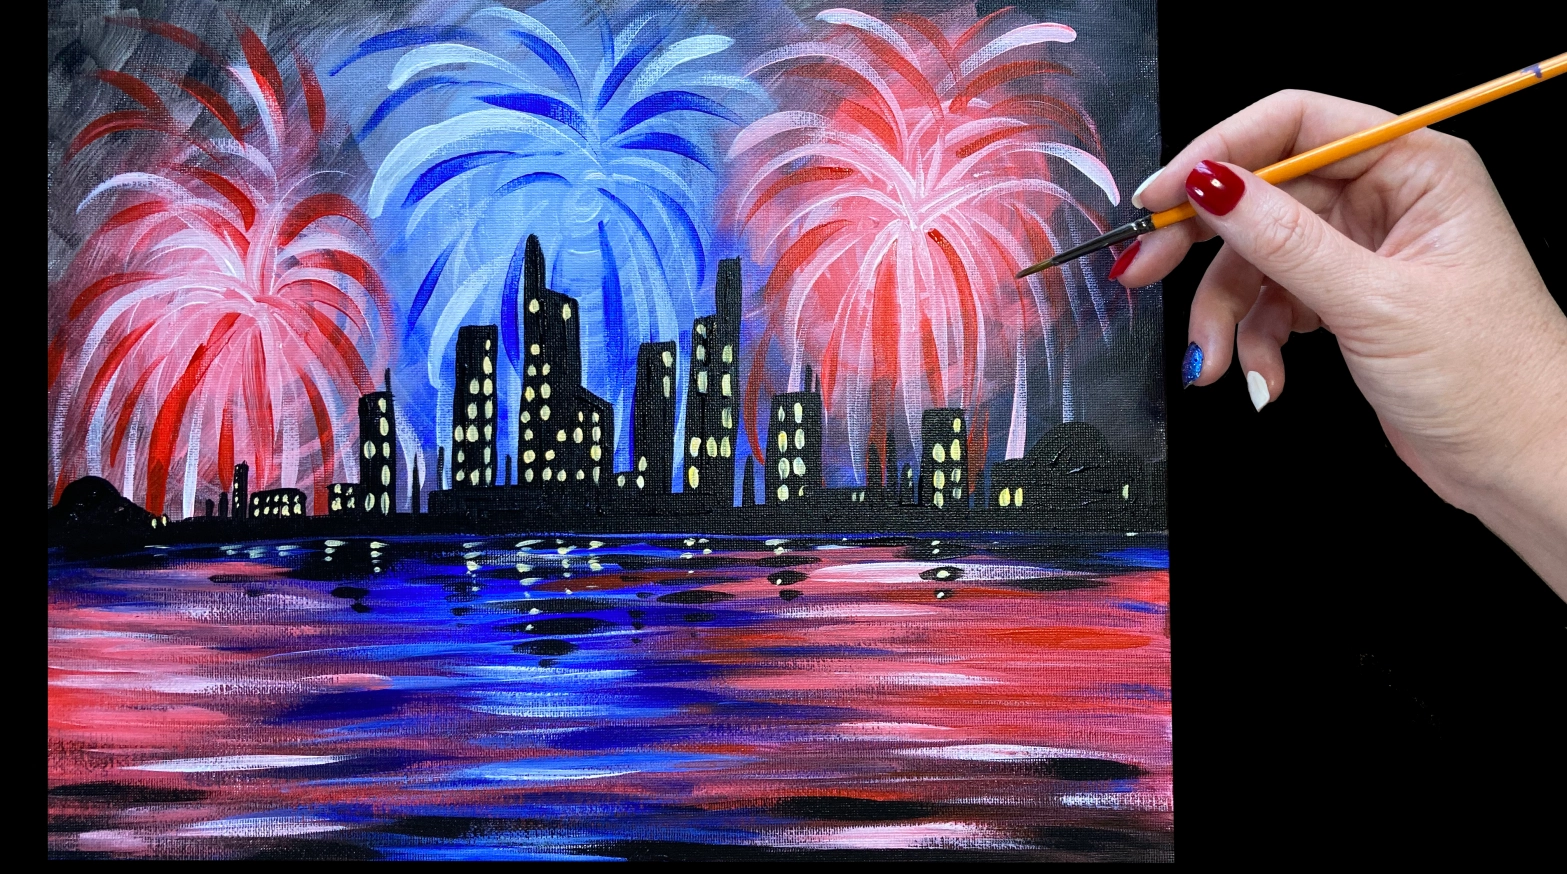 New Video “Fourth of July Fireworks” easy acrylic painting ...